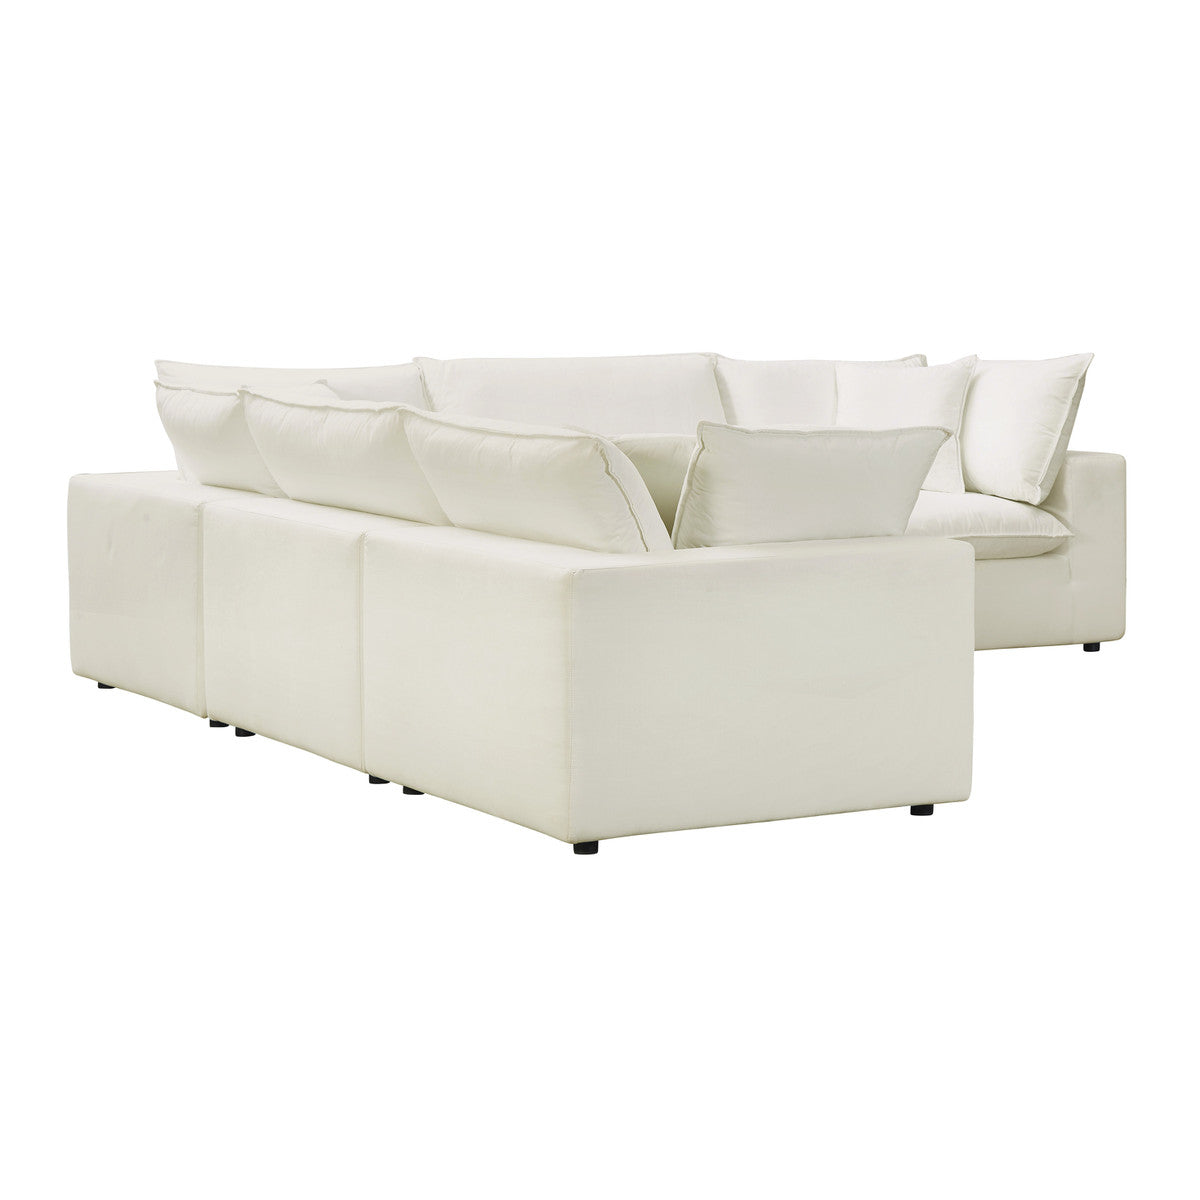 Carlie Natural Modular L-Sectional Sofa - Luxury Living Collection